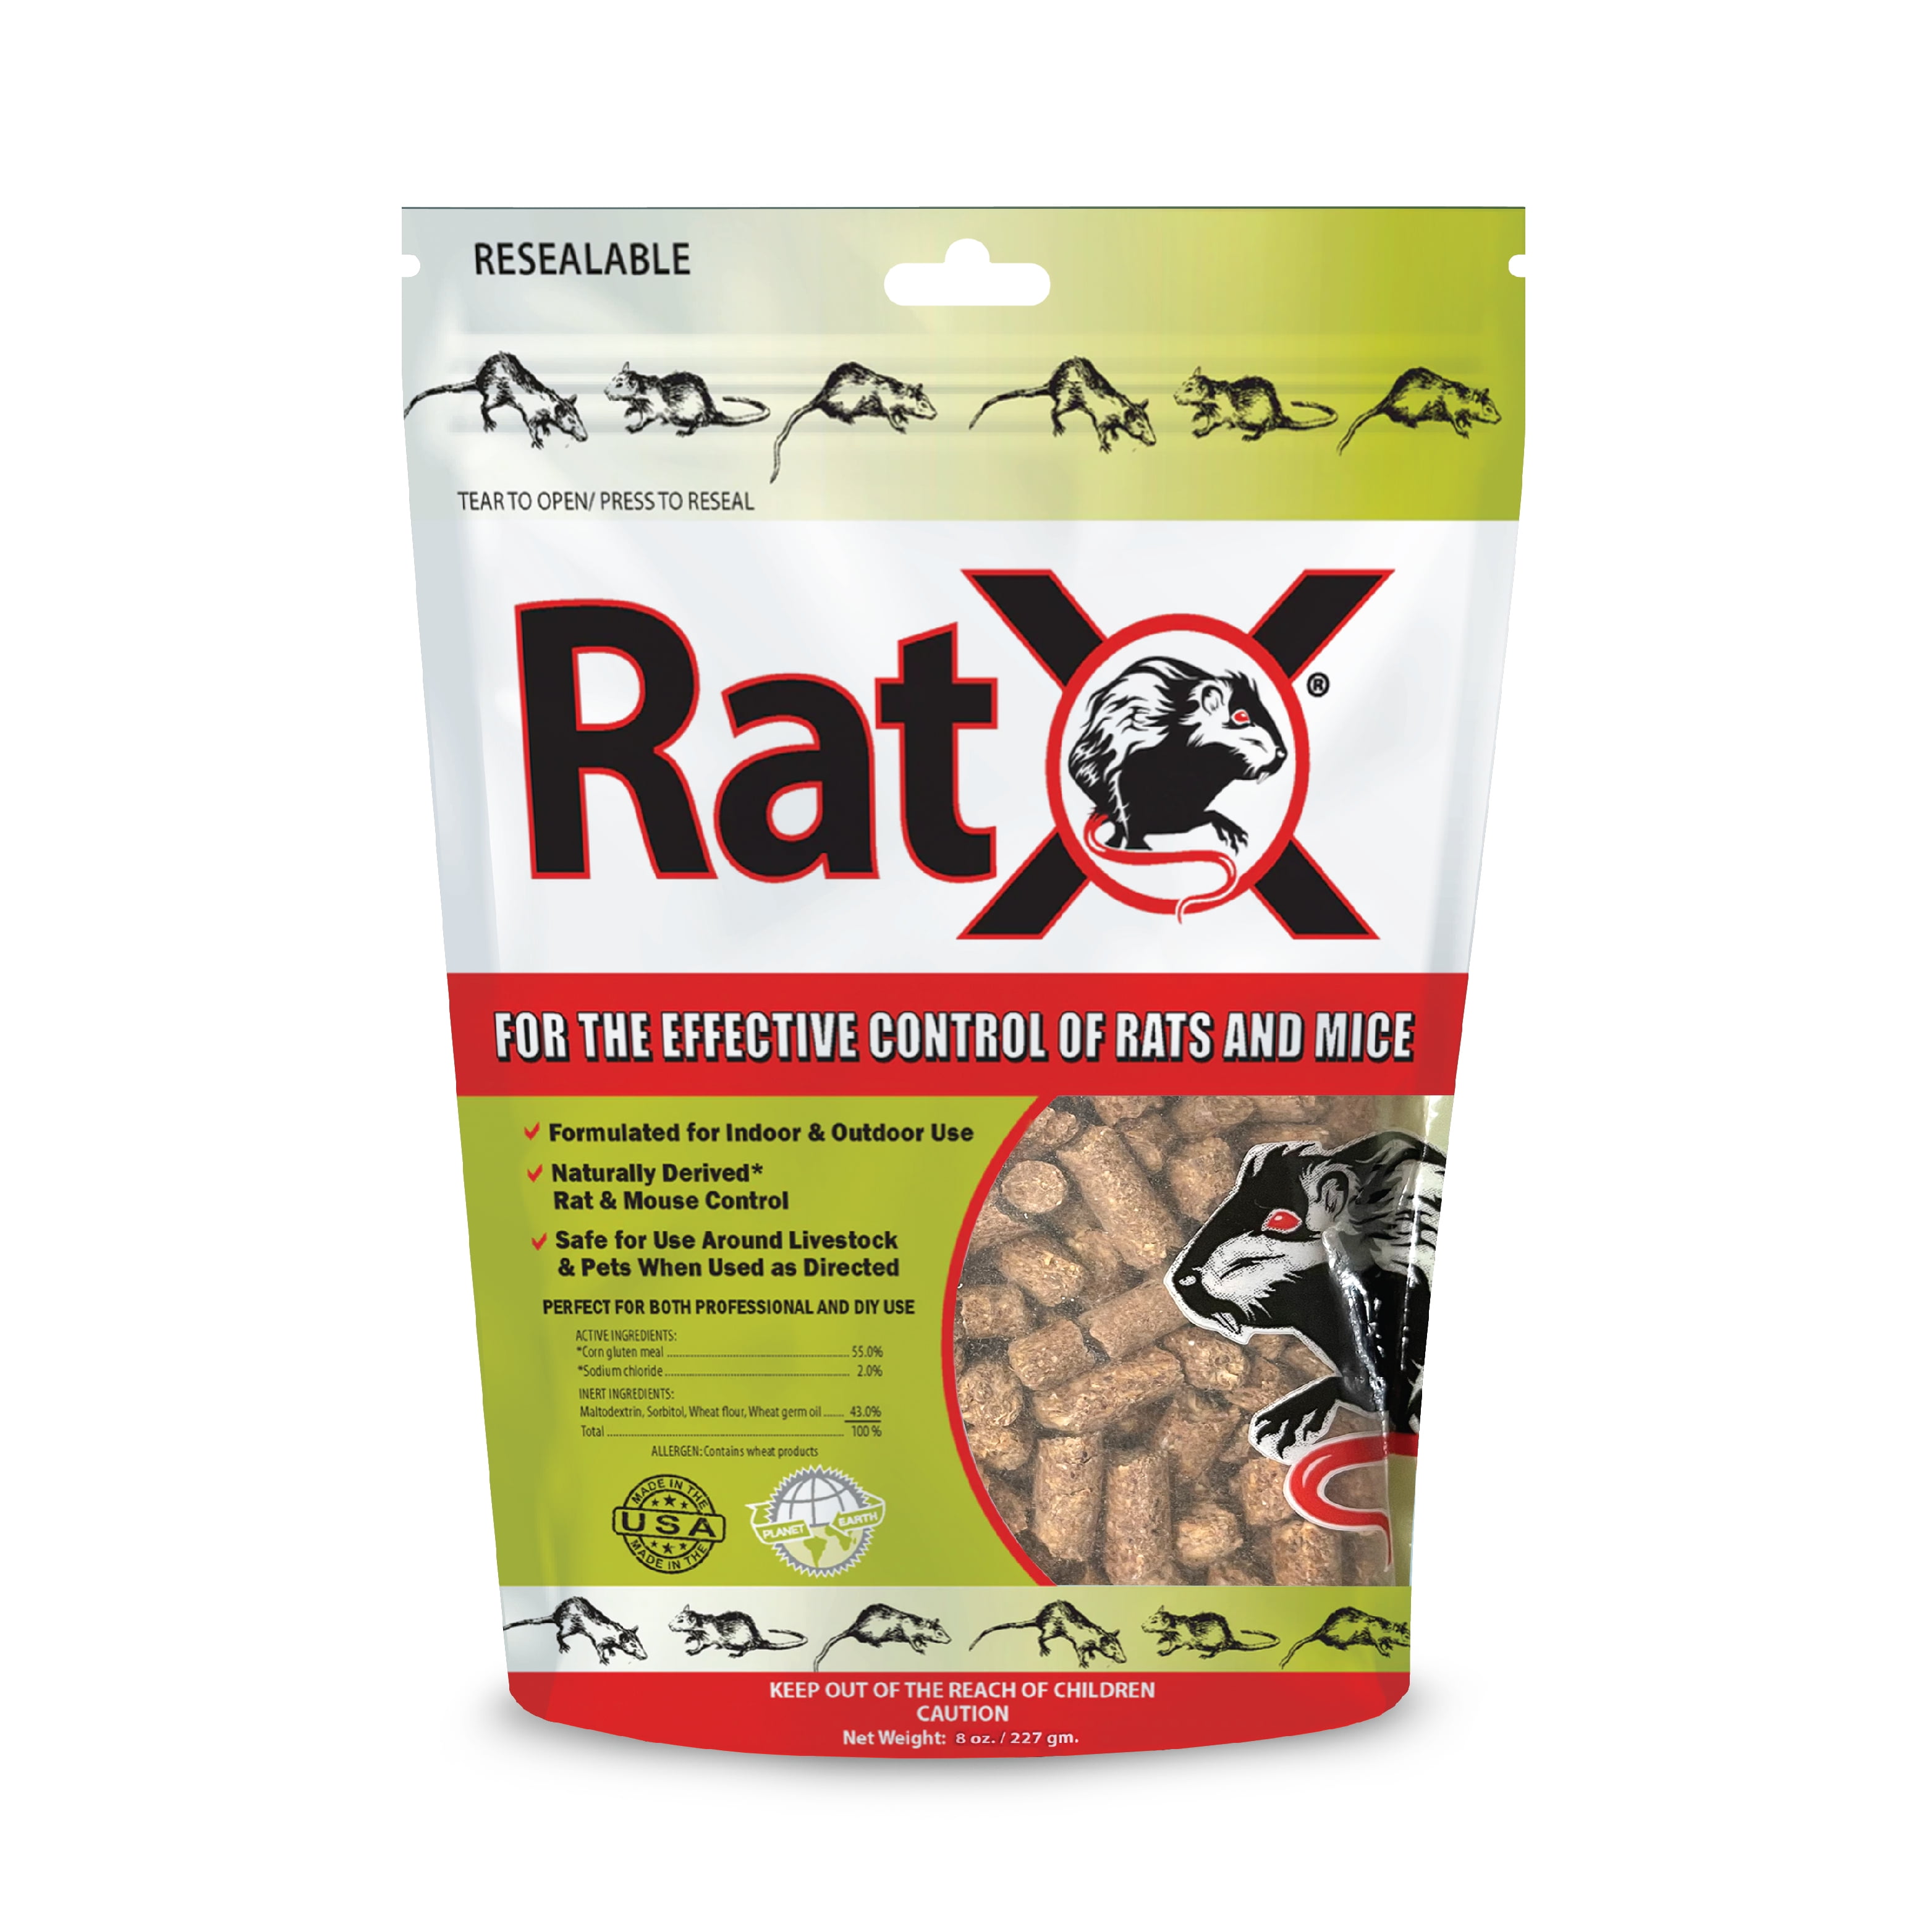 KILLER BAIT RAT 80 GRAM MOUSE RODENT MICE EAT POISON CONTROL NEW FREE SHIPPING 